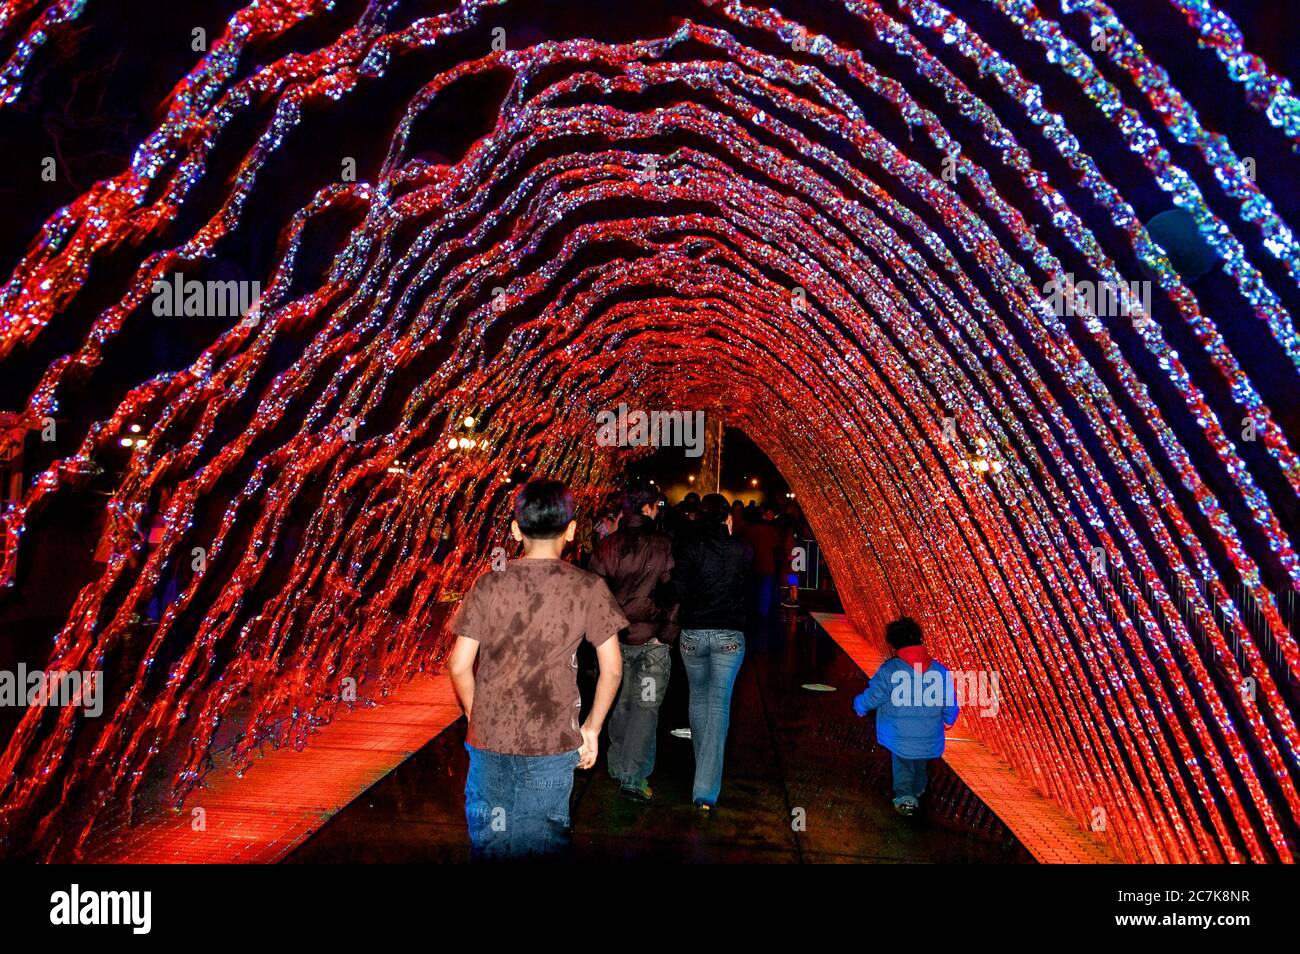 Lima, Peru - October 15, 2008: Magic Water Circuit (El Circuito Magico del Agua), water fountains at Park of the Reserve. People walking in Tunnel Fou Stock Photo